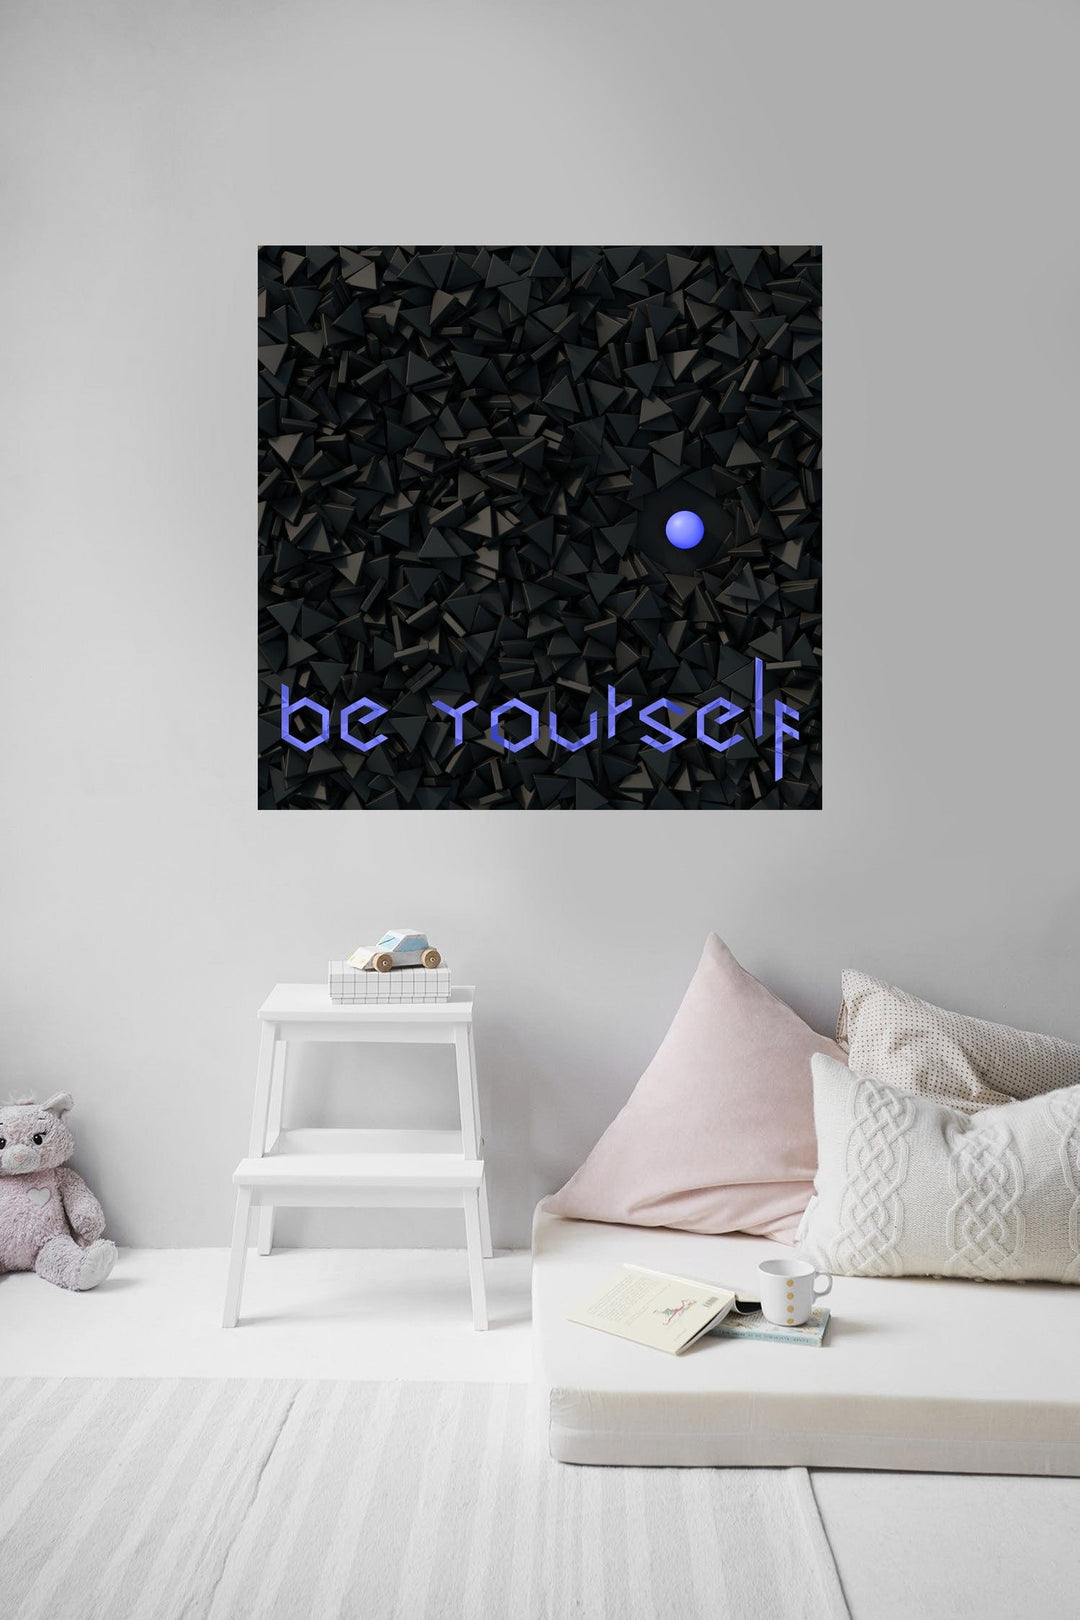 Slick Prints Wall Stickers Be Yourself Wall Sticker